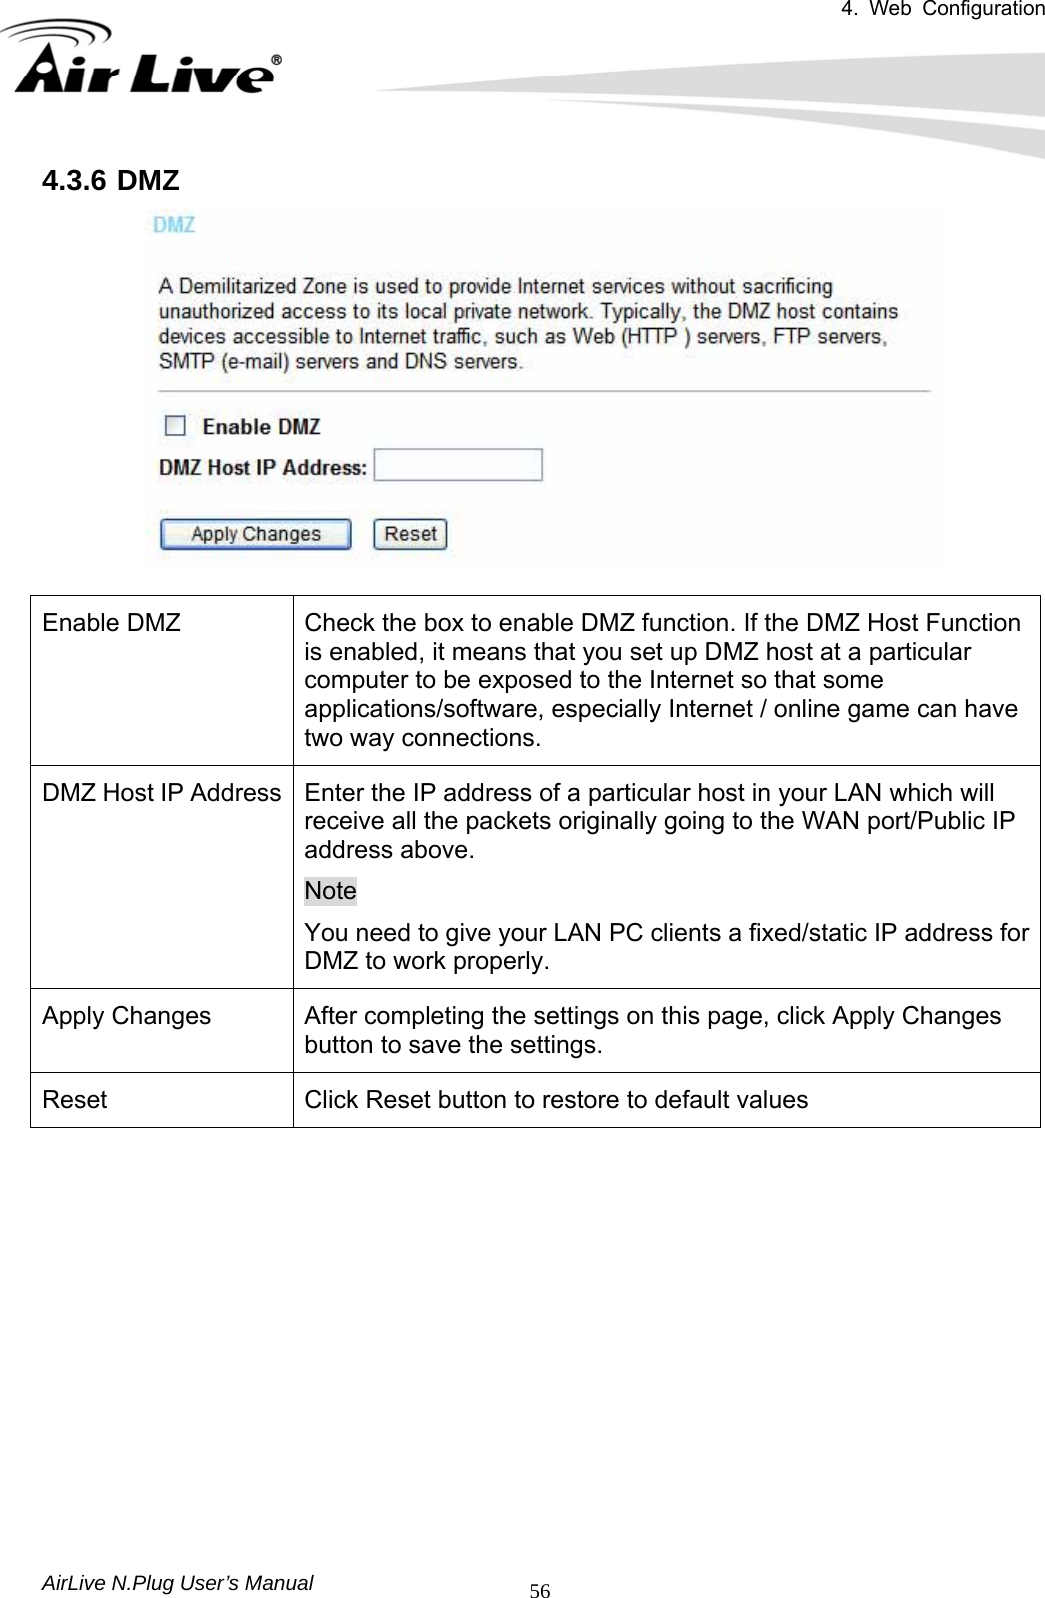 4. Web Configuration       AirLive N.Plug User’s Manual  564.3.6 DMZ   Enable DMZ  Check the box to enable DMZ function. If the DMZ Host Function is enabled, it means that you set up DMZ host at a particular computer to be exposed to the Internet so that some applications/software, especially Internet / online game can have two way connections. DMZ Host IP Address  Enter the IP address of a particular host in your LAN which will receive all the packets originally going to the WAN port/Public IP address above.   Note You need to give your LAN PC clients a fixed/static IP address for DMZ to work properly. Apply Changes  After completing the settings on this page, click Apply Changes button to save the settings. Reset  Click Reset button to restore to default values  